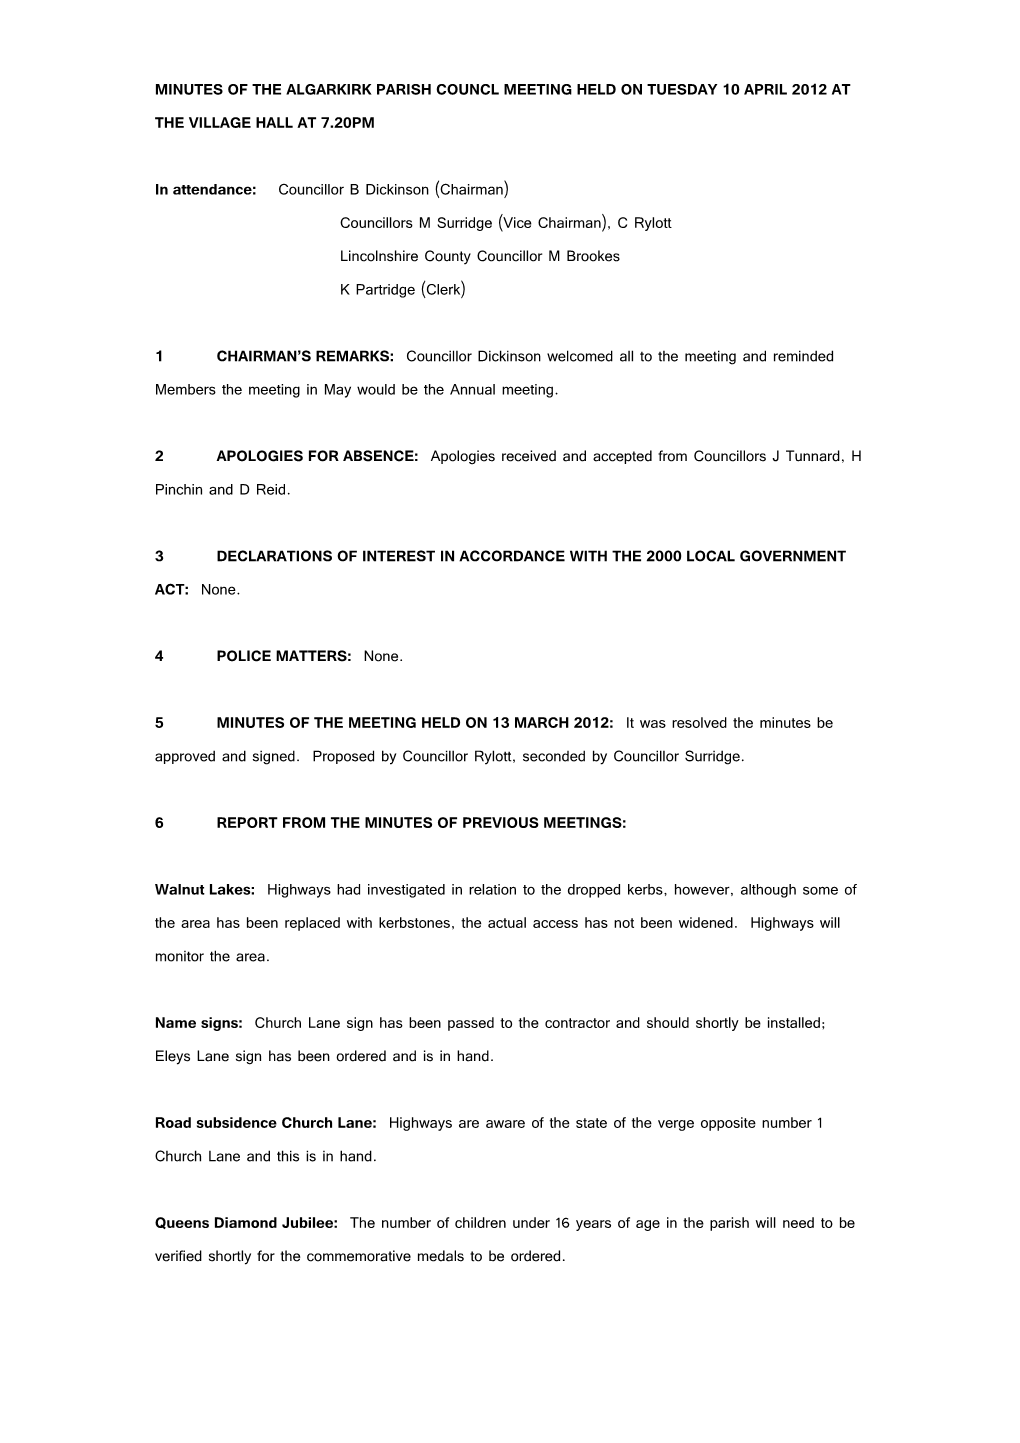 Minutes of the Algarkirk Parish Councl Meeting Held on Tuesday 10 April 2012 at the Village